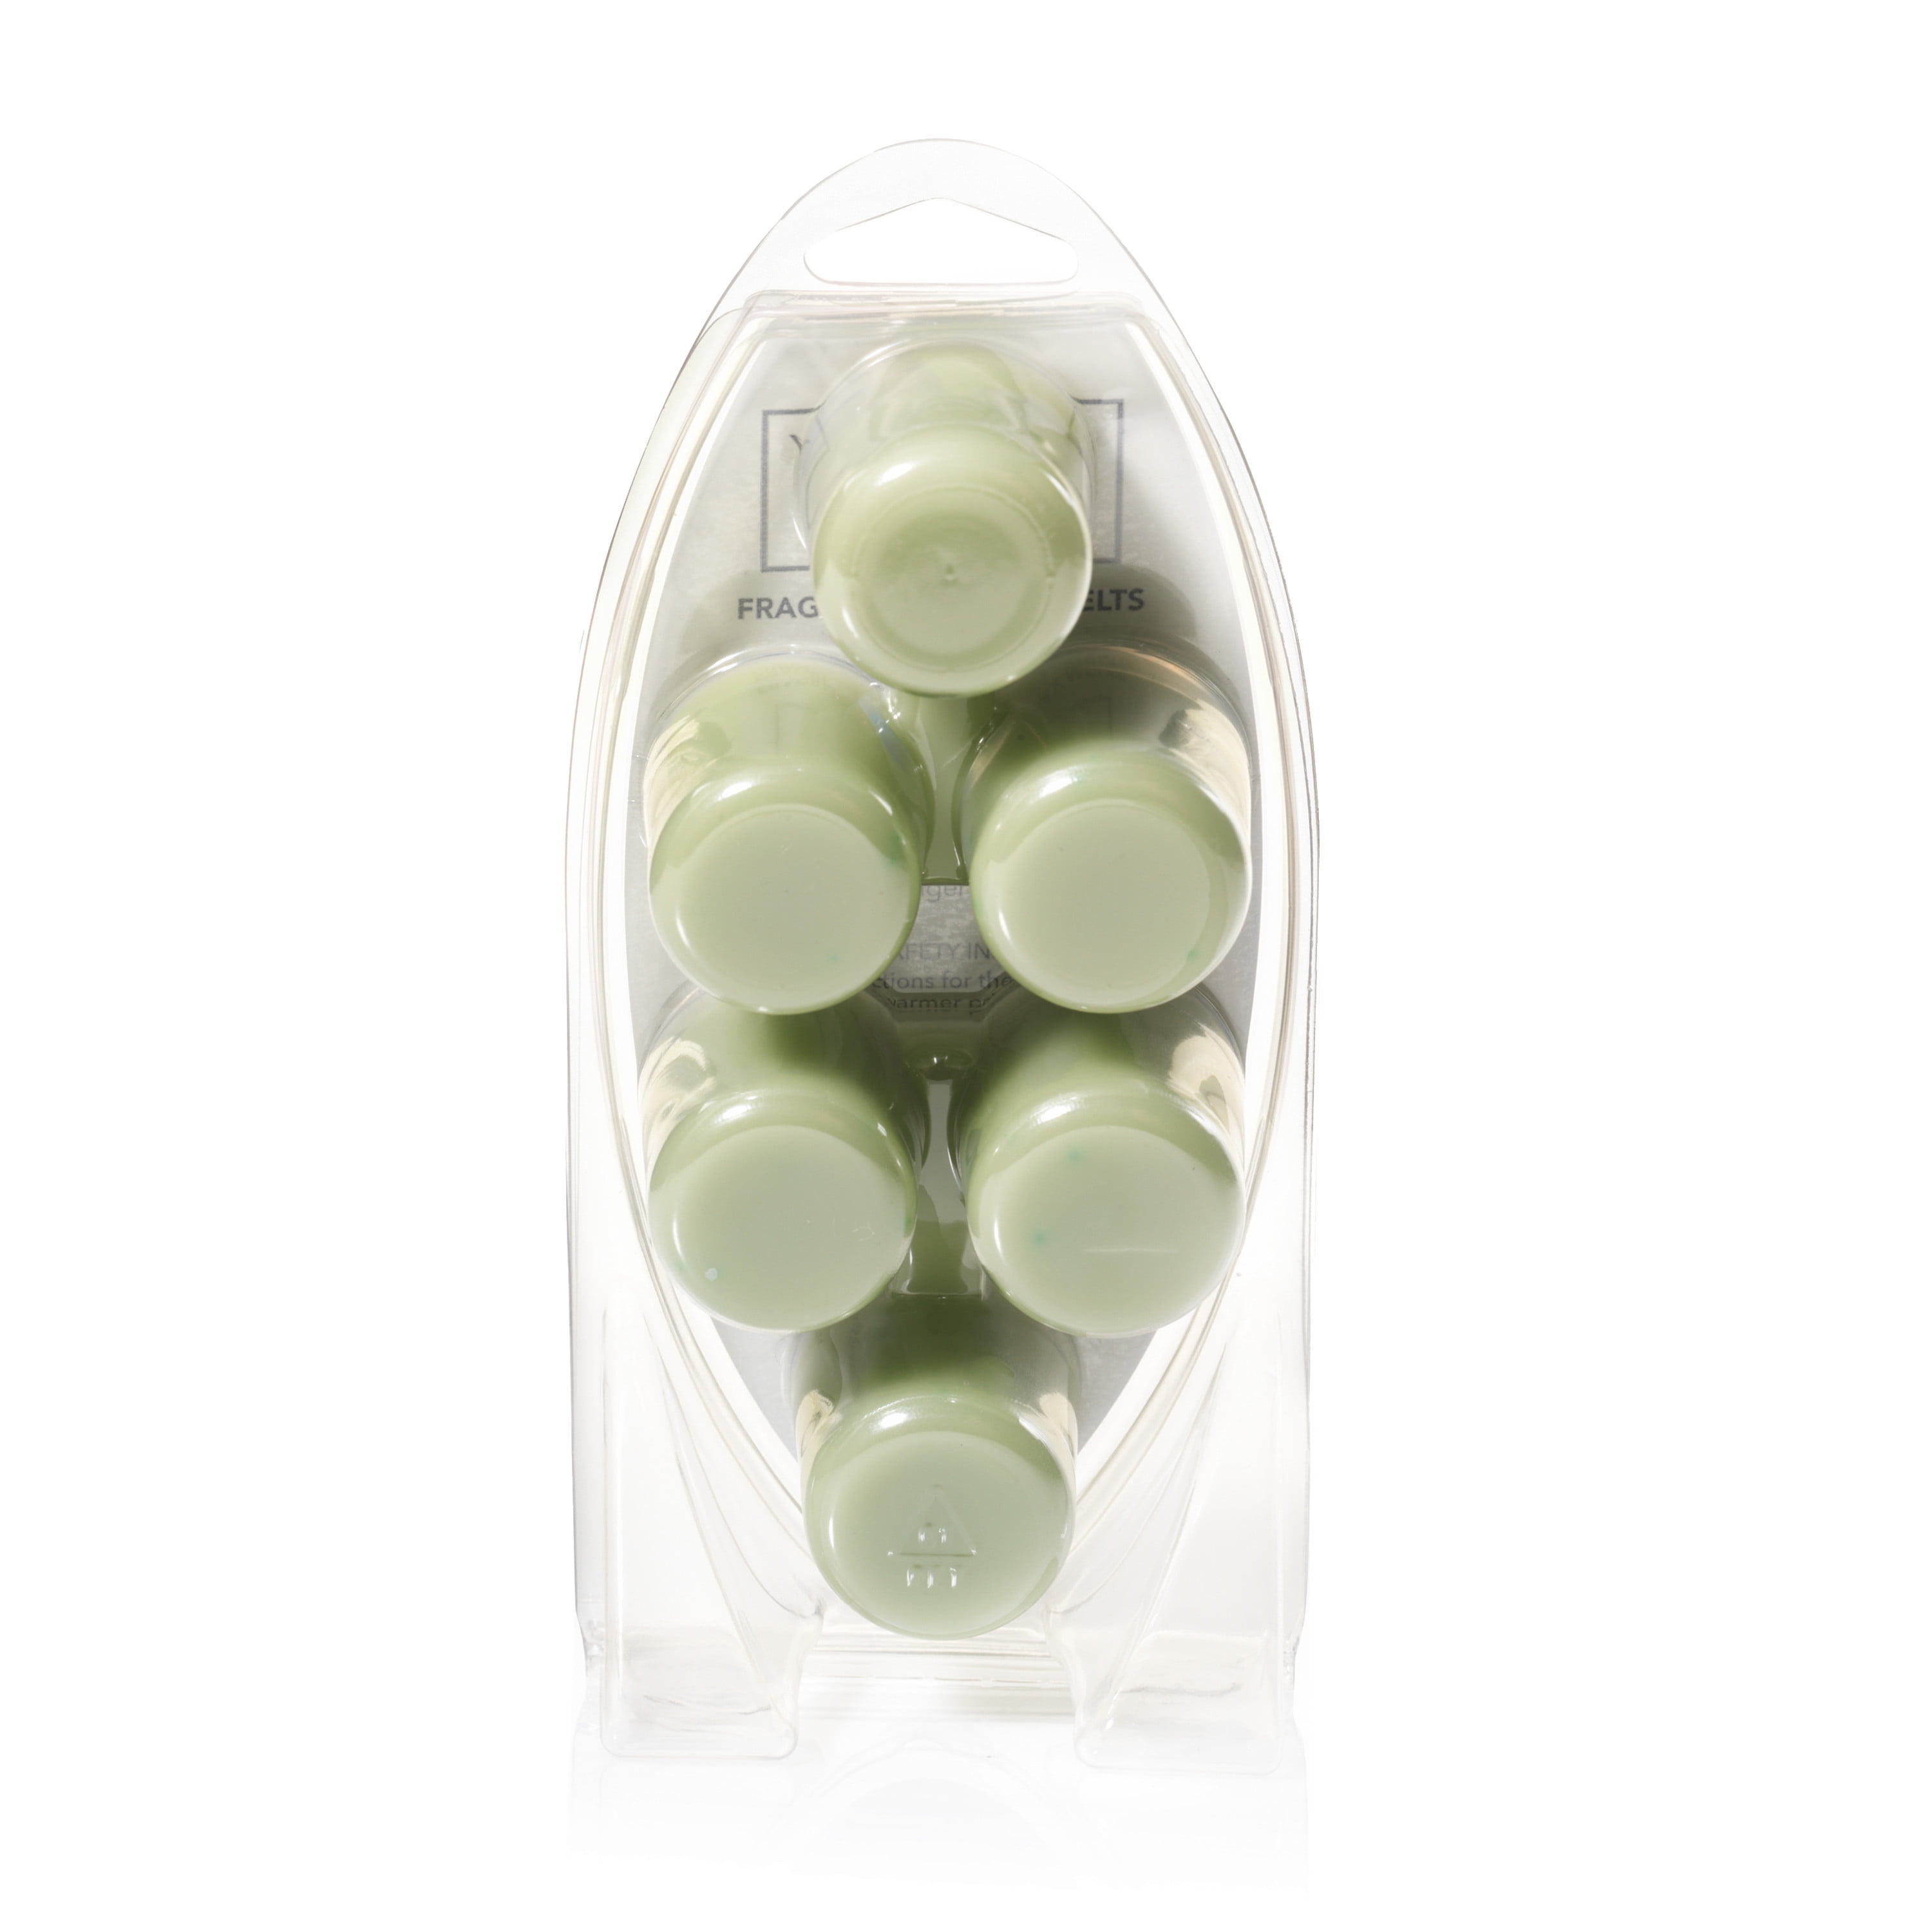 Yankee Candle® Sage & Citrus Fragranced Wax Melts, 6 pk - Fred Meyer